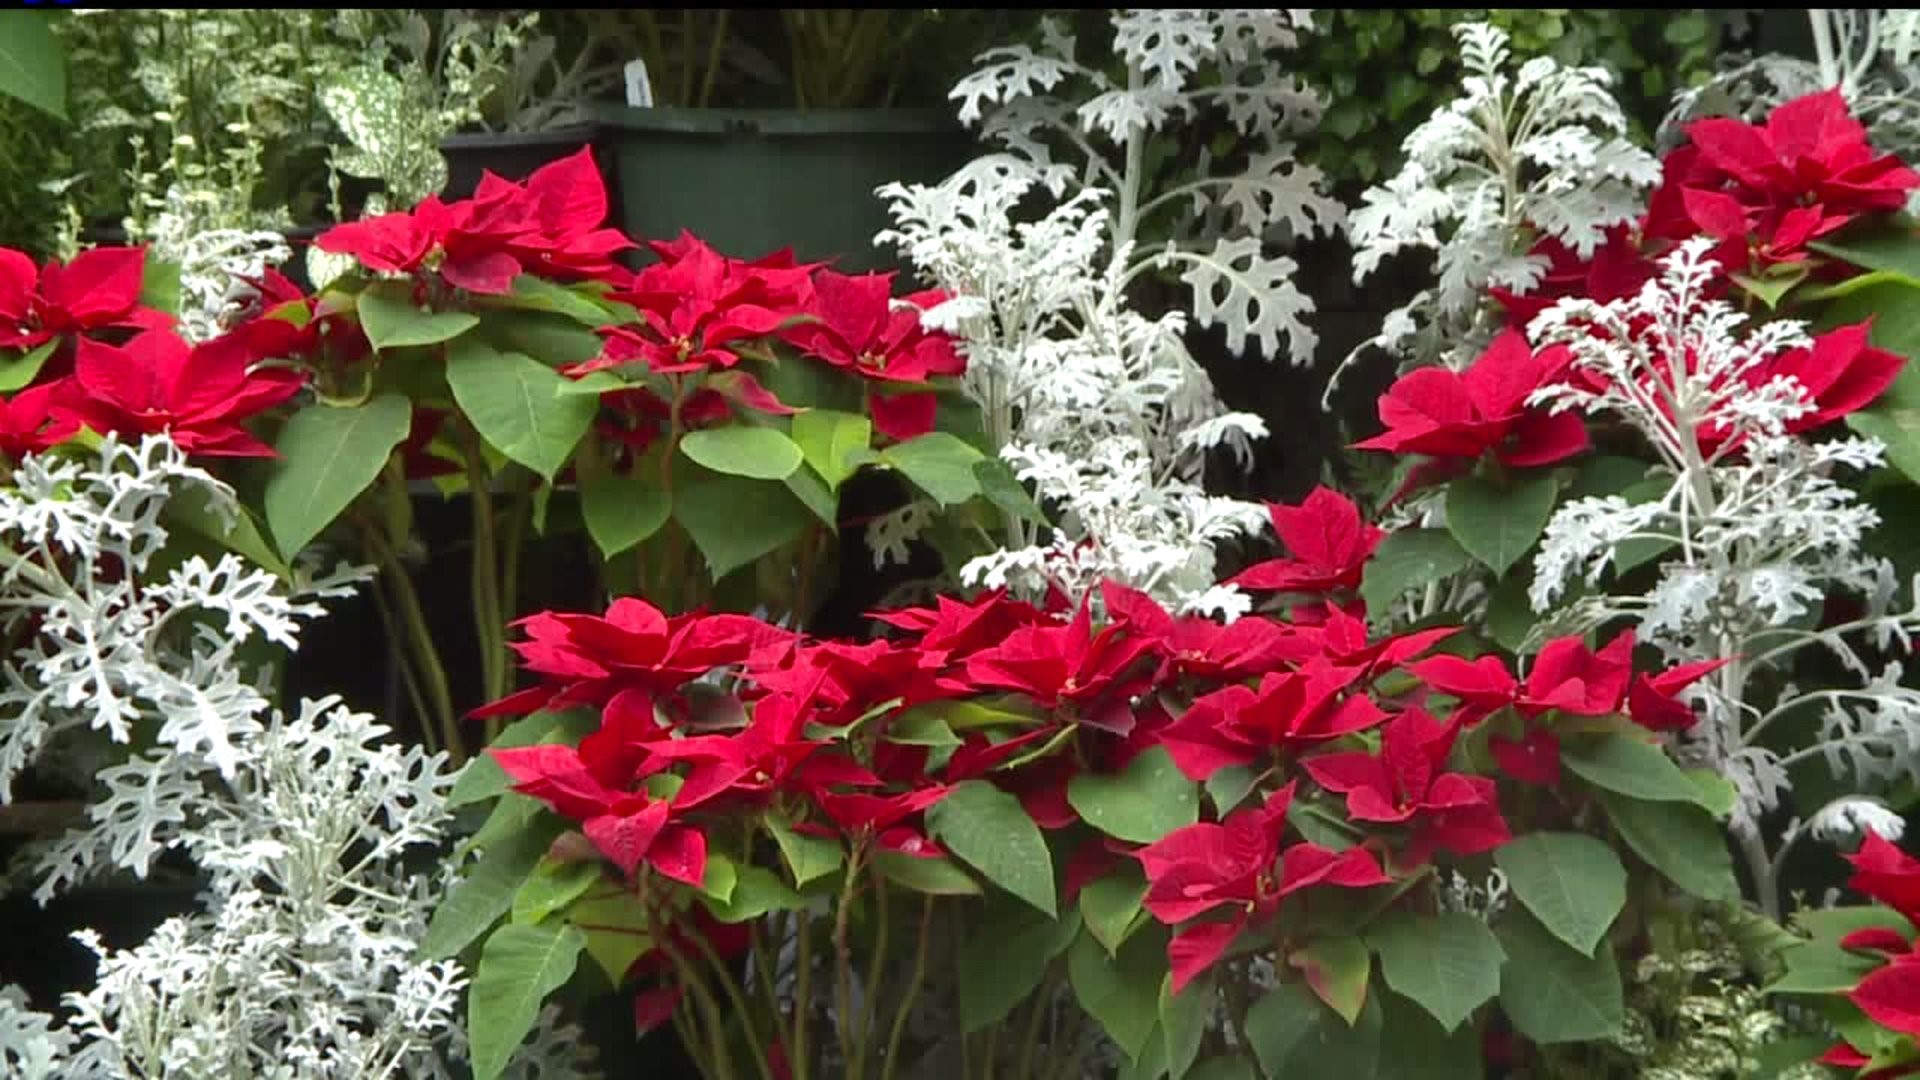 Free poinsettias given away in Davenport